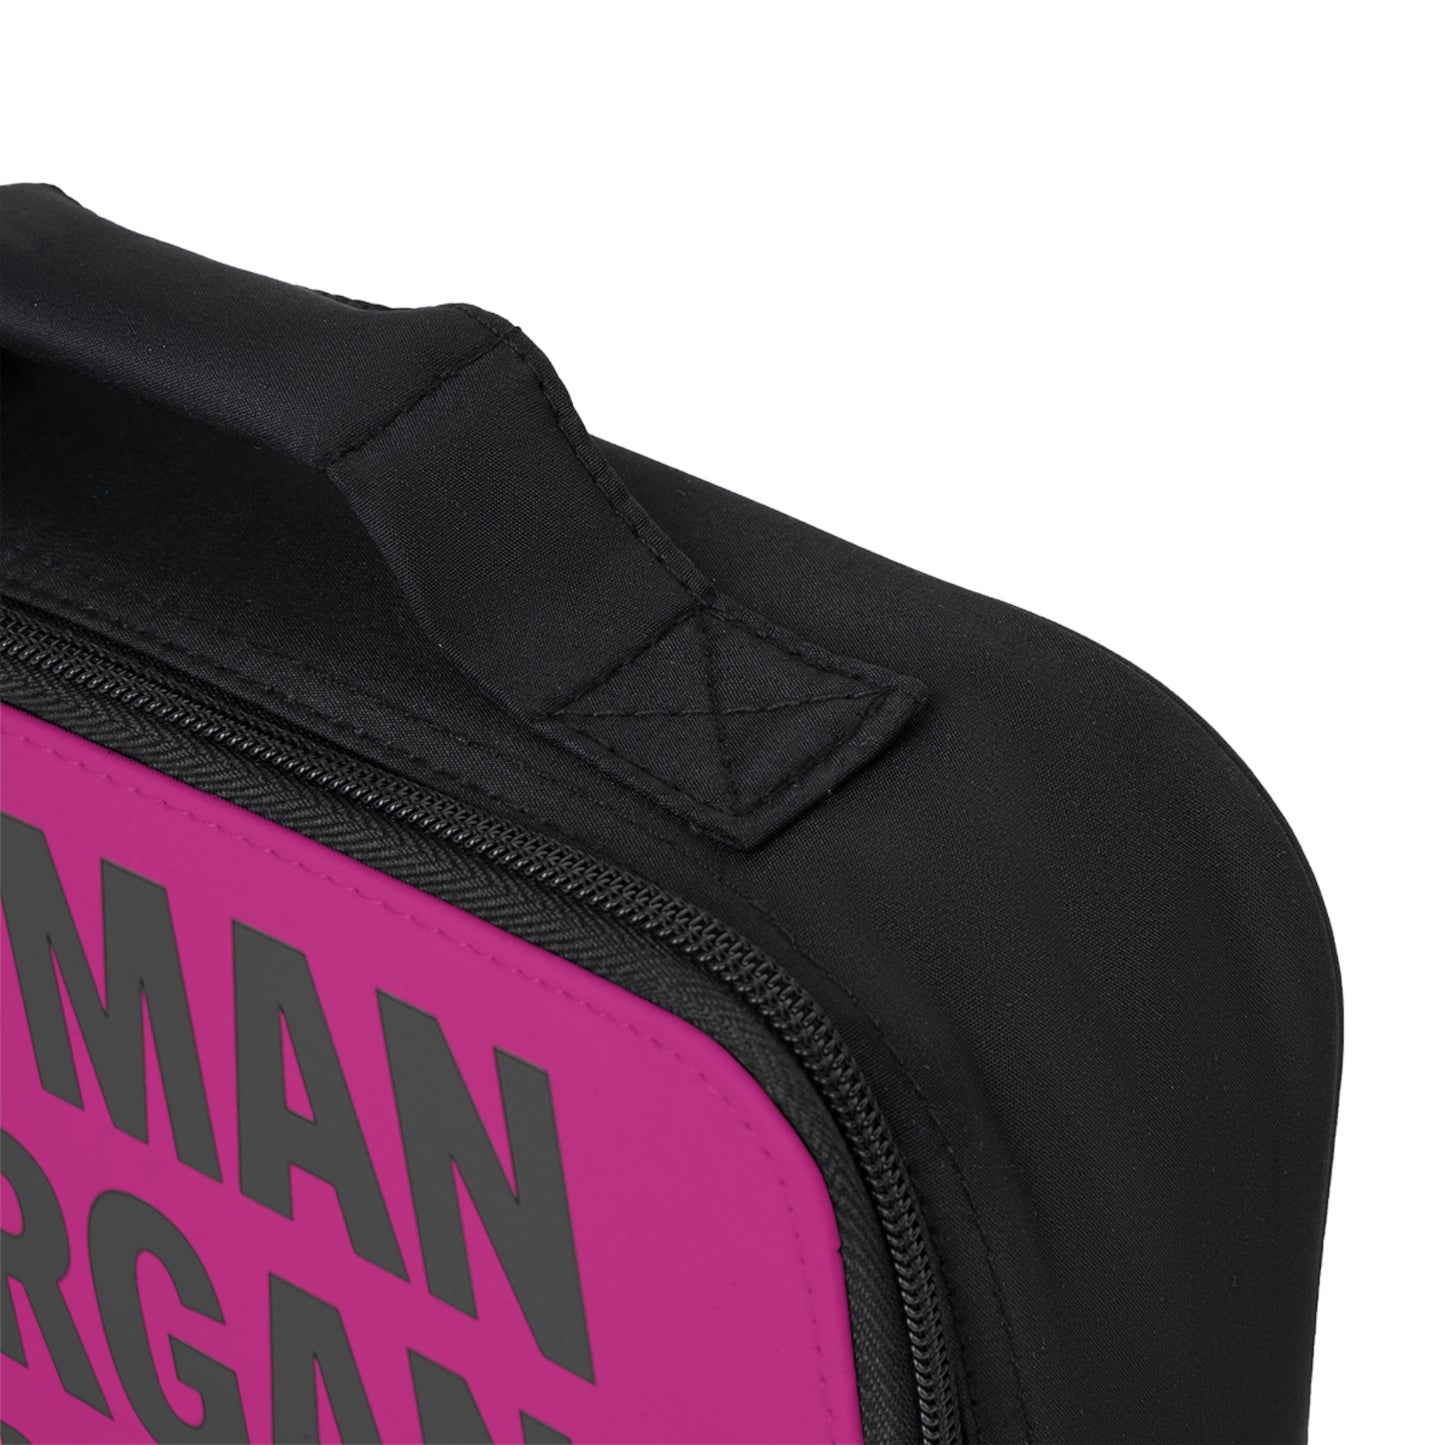 Human Organ for Donation & Snacks - Pink - Lunch Bag